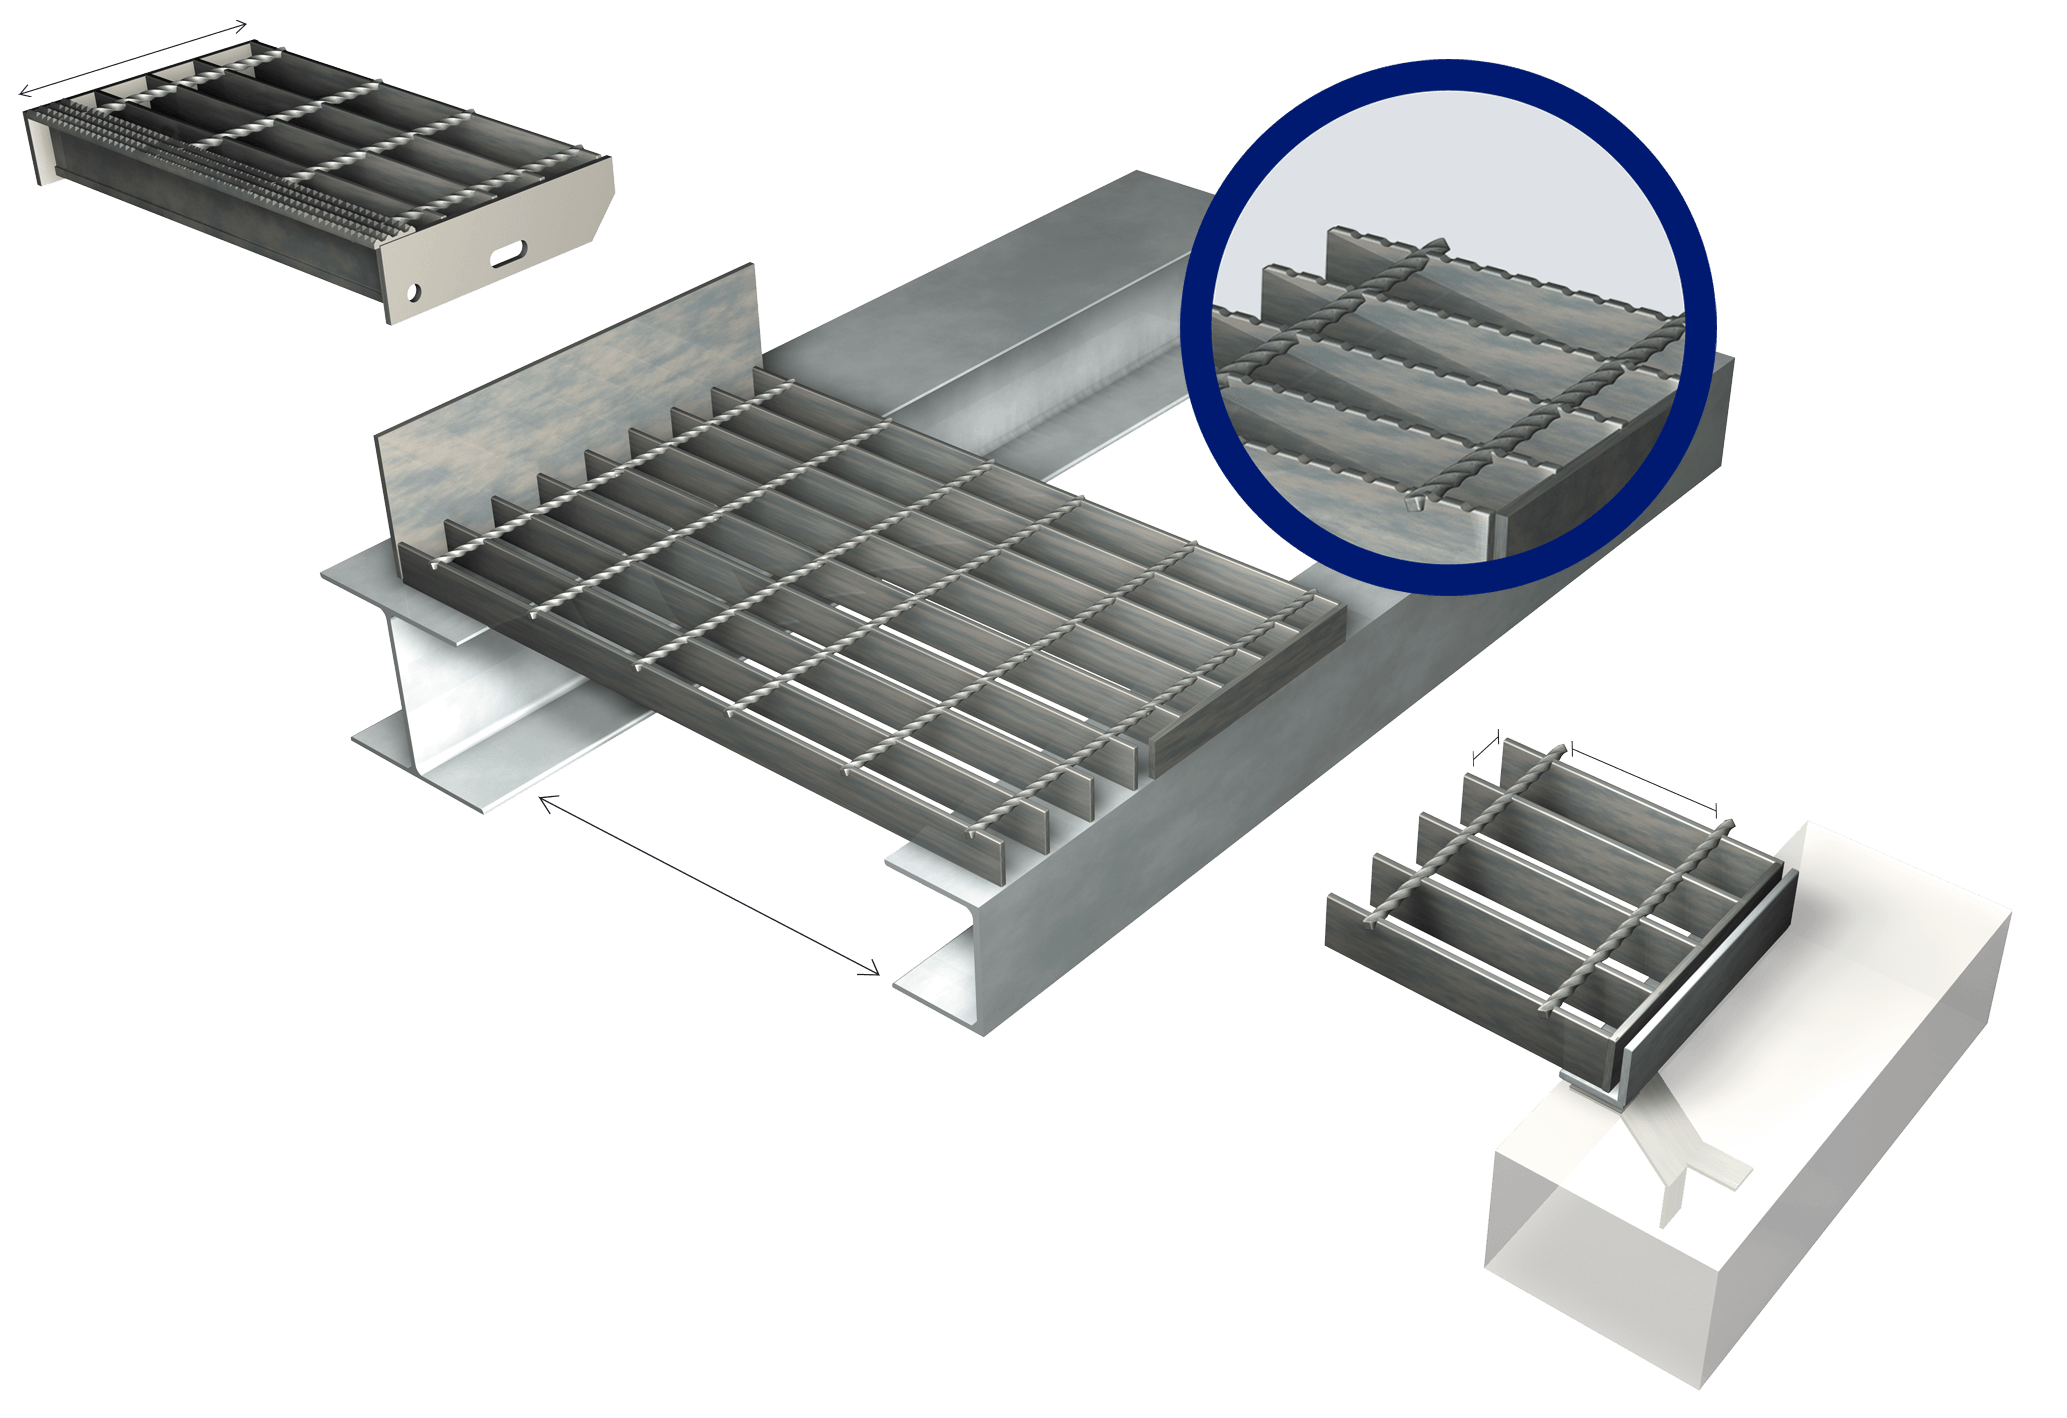 Image of a safegrid, with a highlight on the serrated flooring bars.